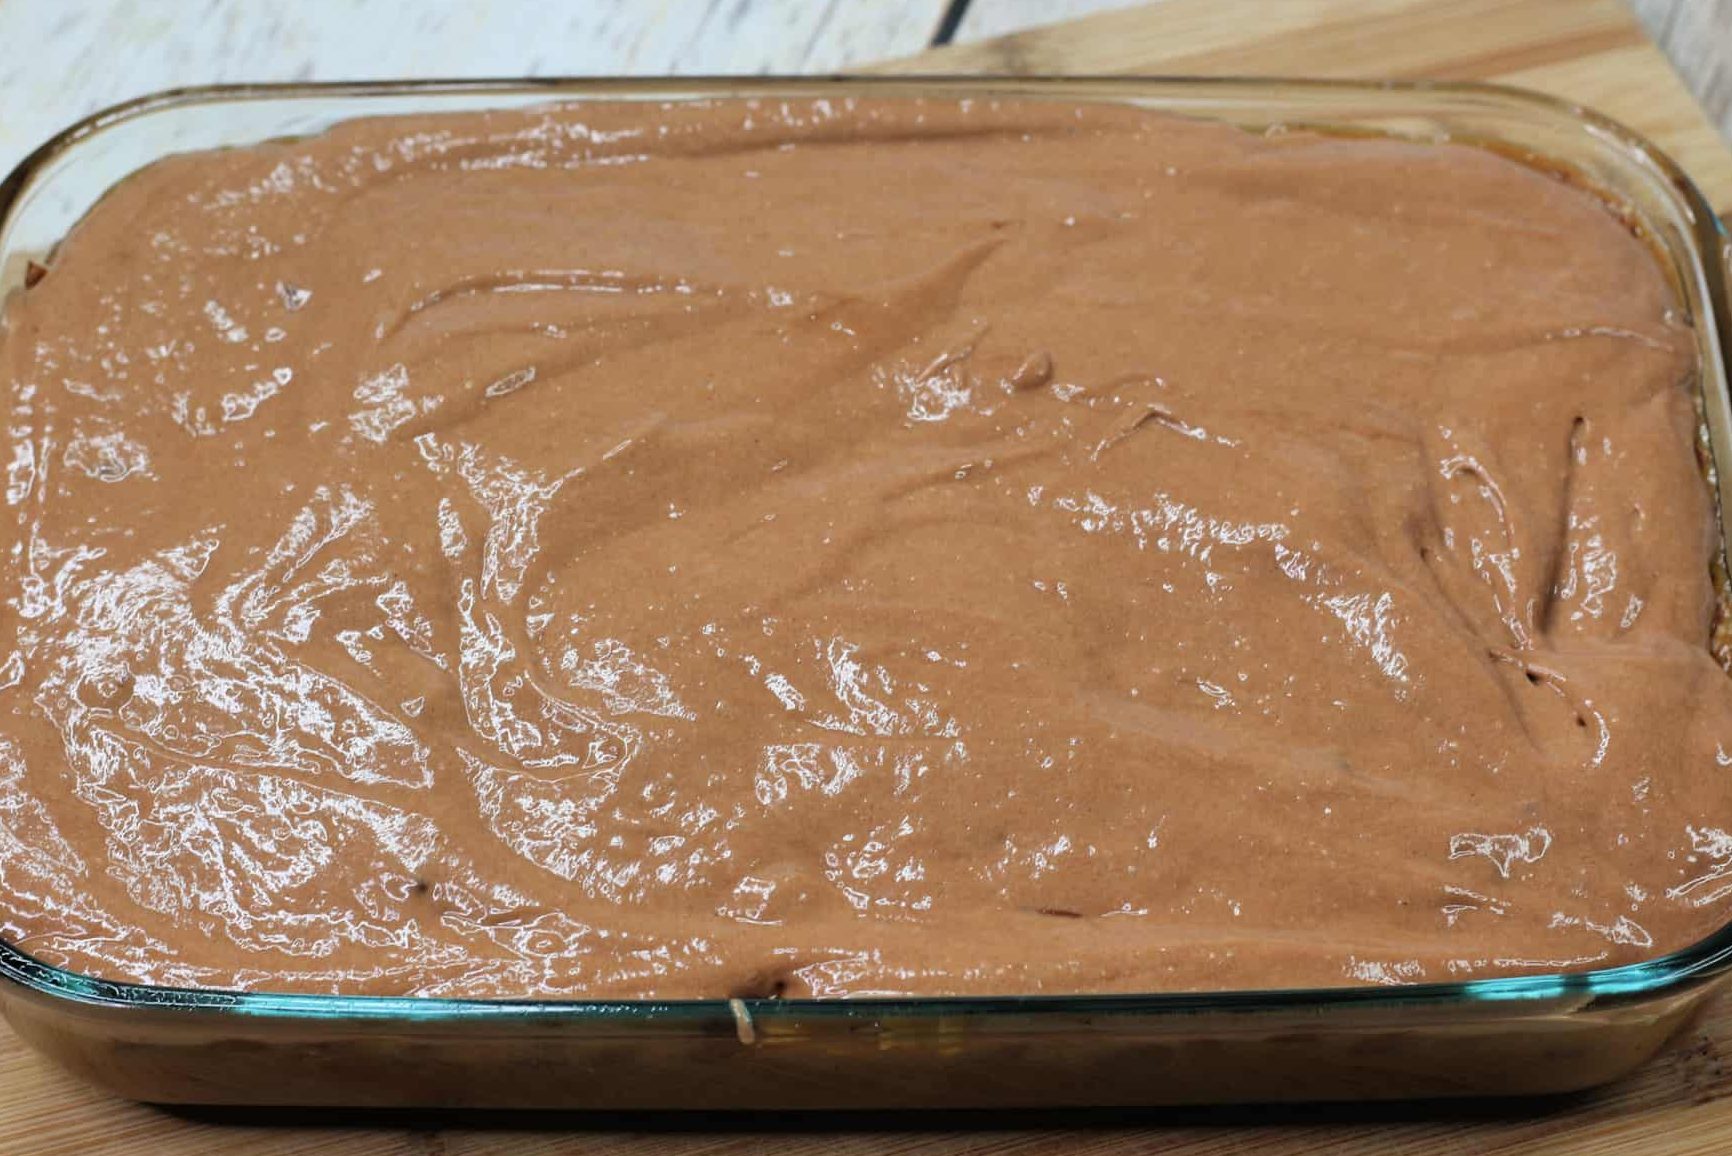 Pour the remaining cake batter on top of the caramel mixture and place it back into the oven to bake for 20 minutes.